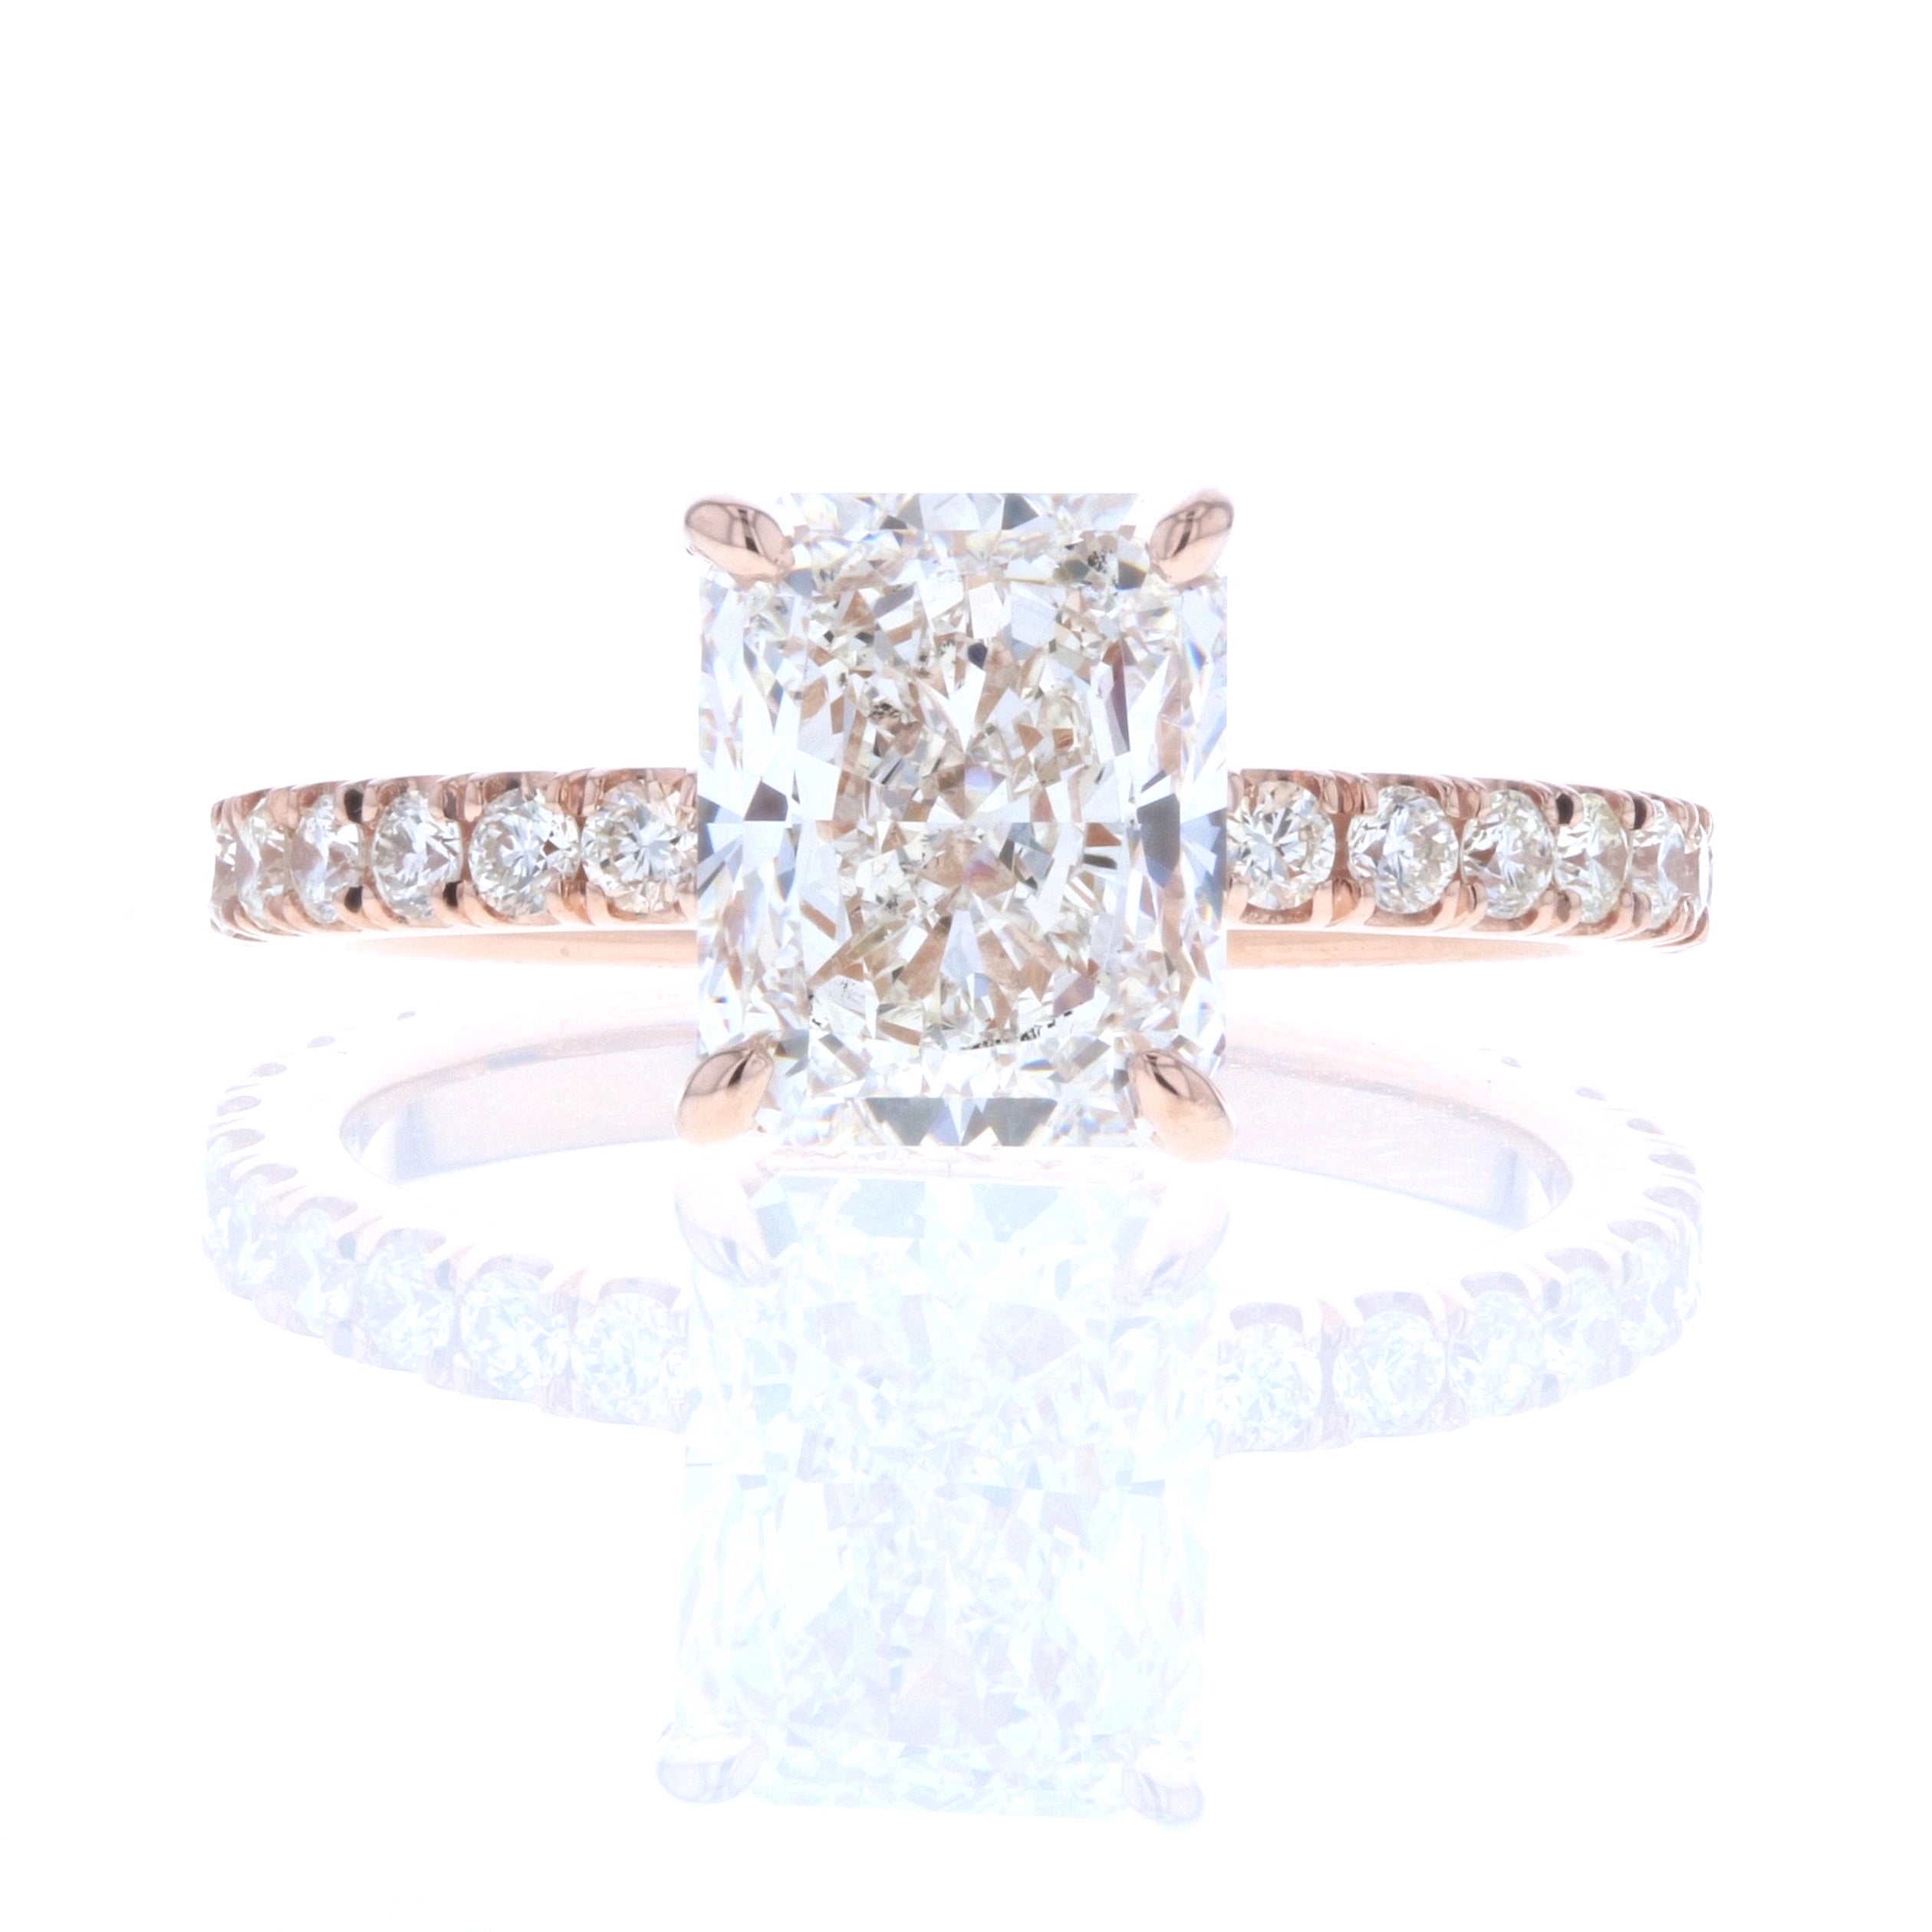 Wedding Bands for Radiant cut engagement ring : r/EngagementRings